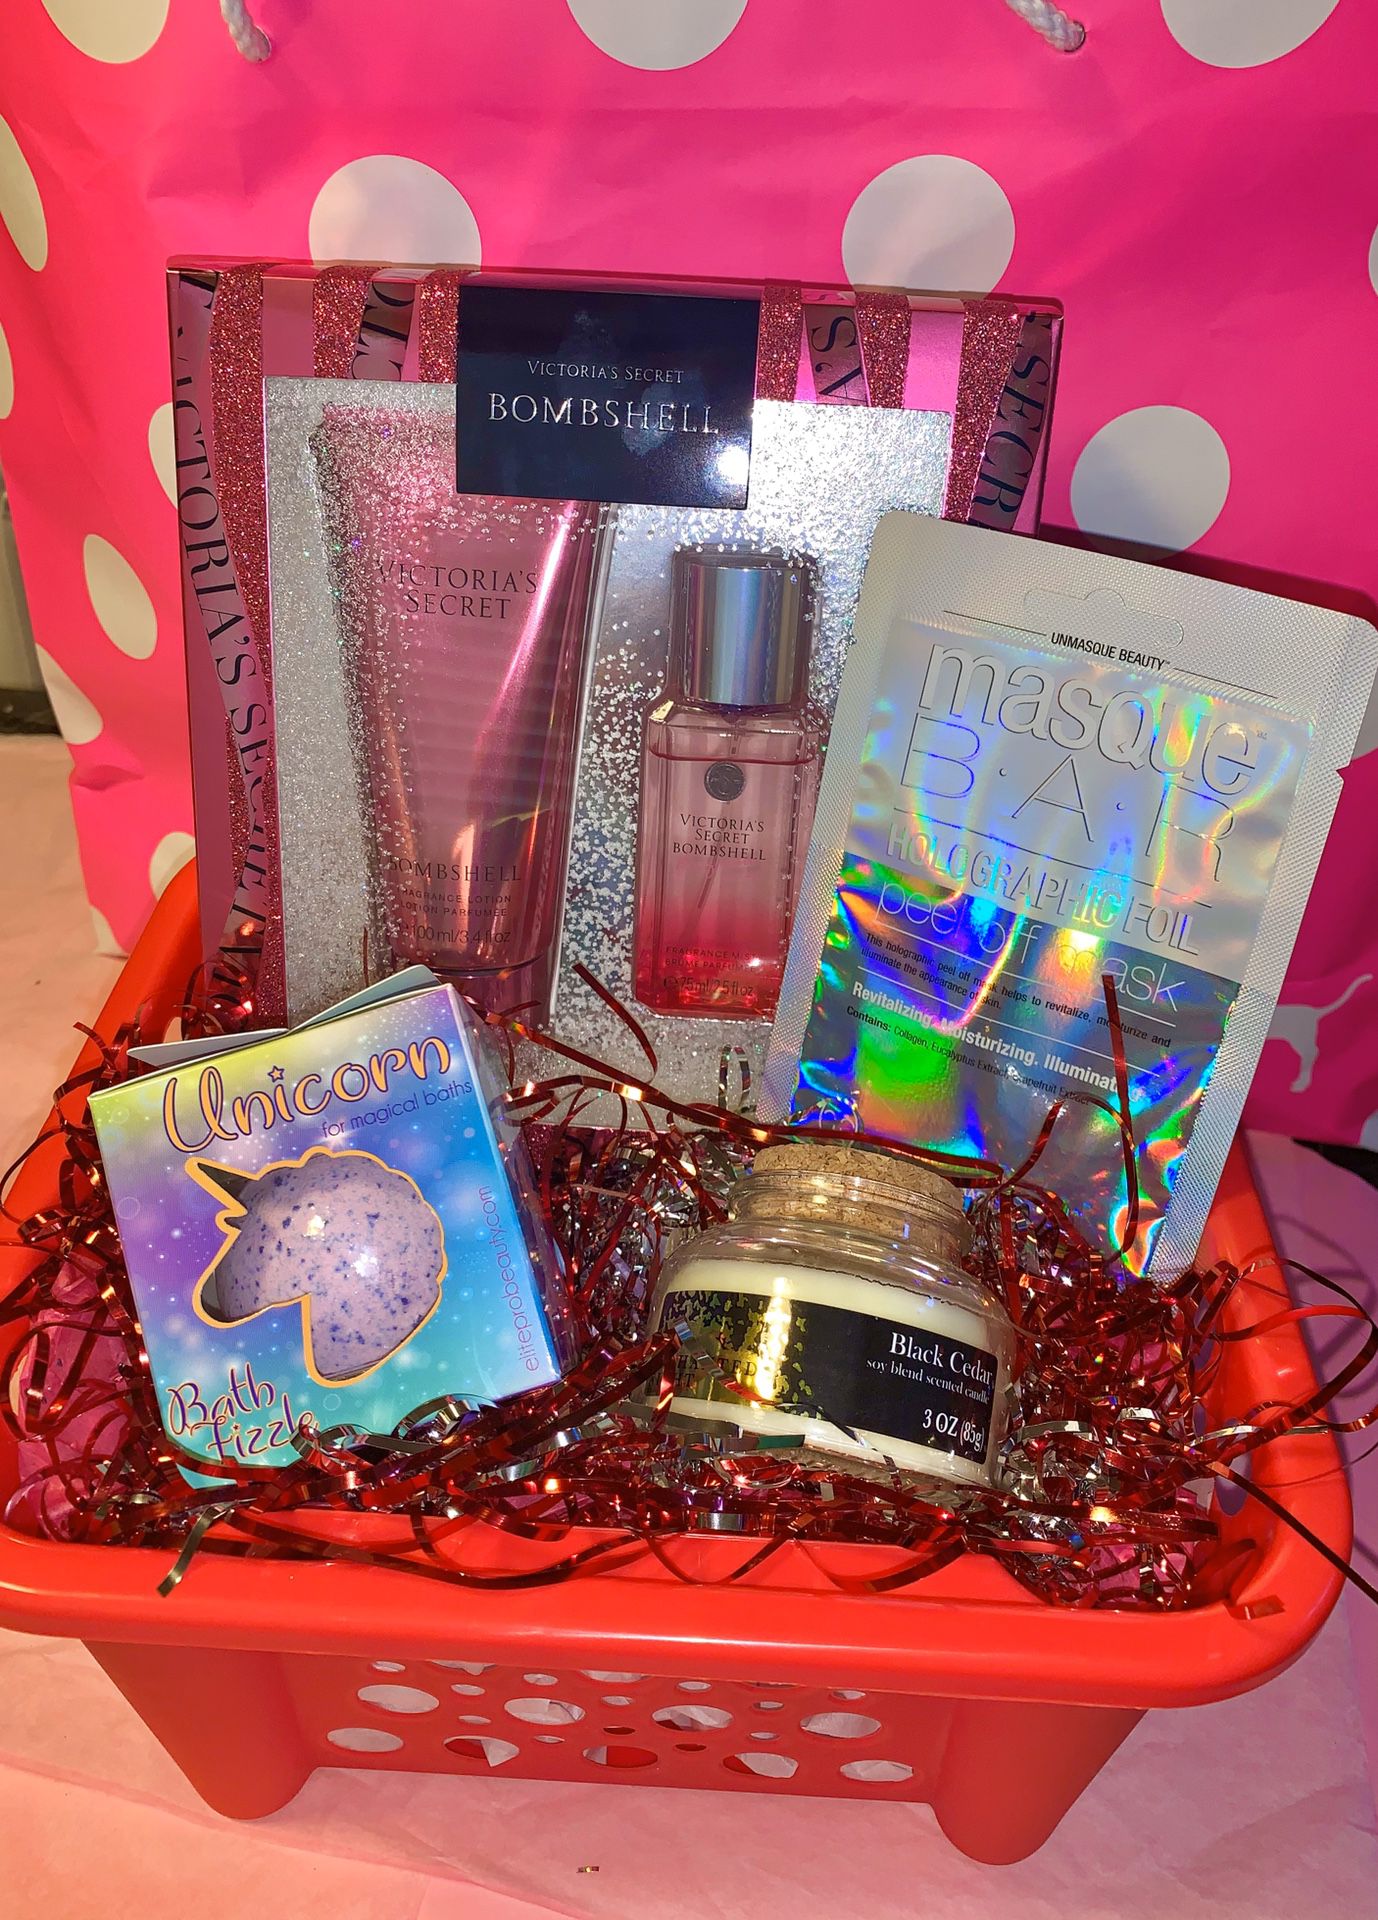 Awesome gift for Christmas! Victoria’s Secret perfume and lotion gift set